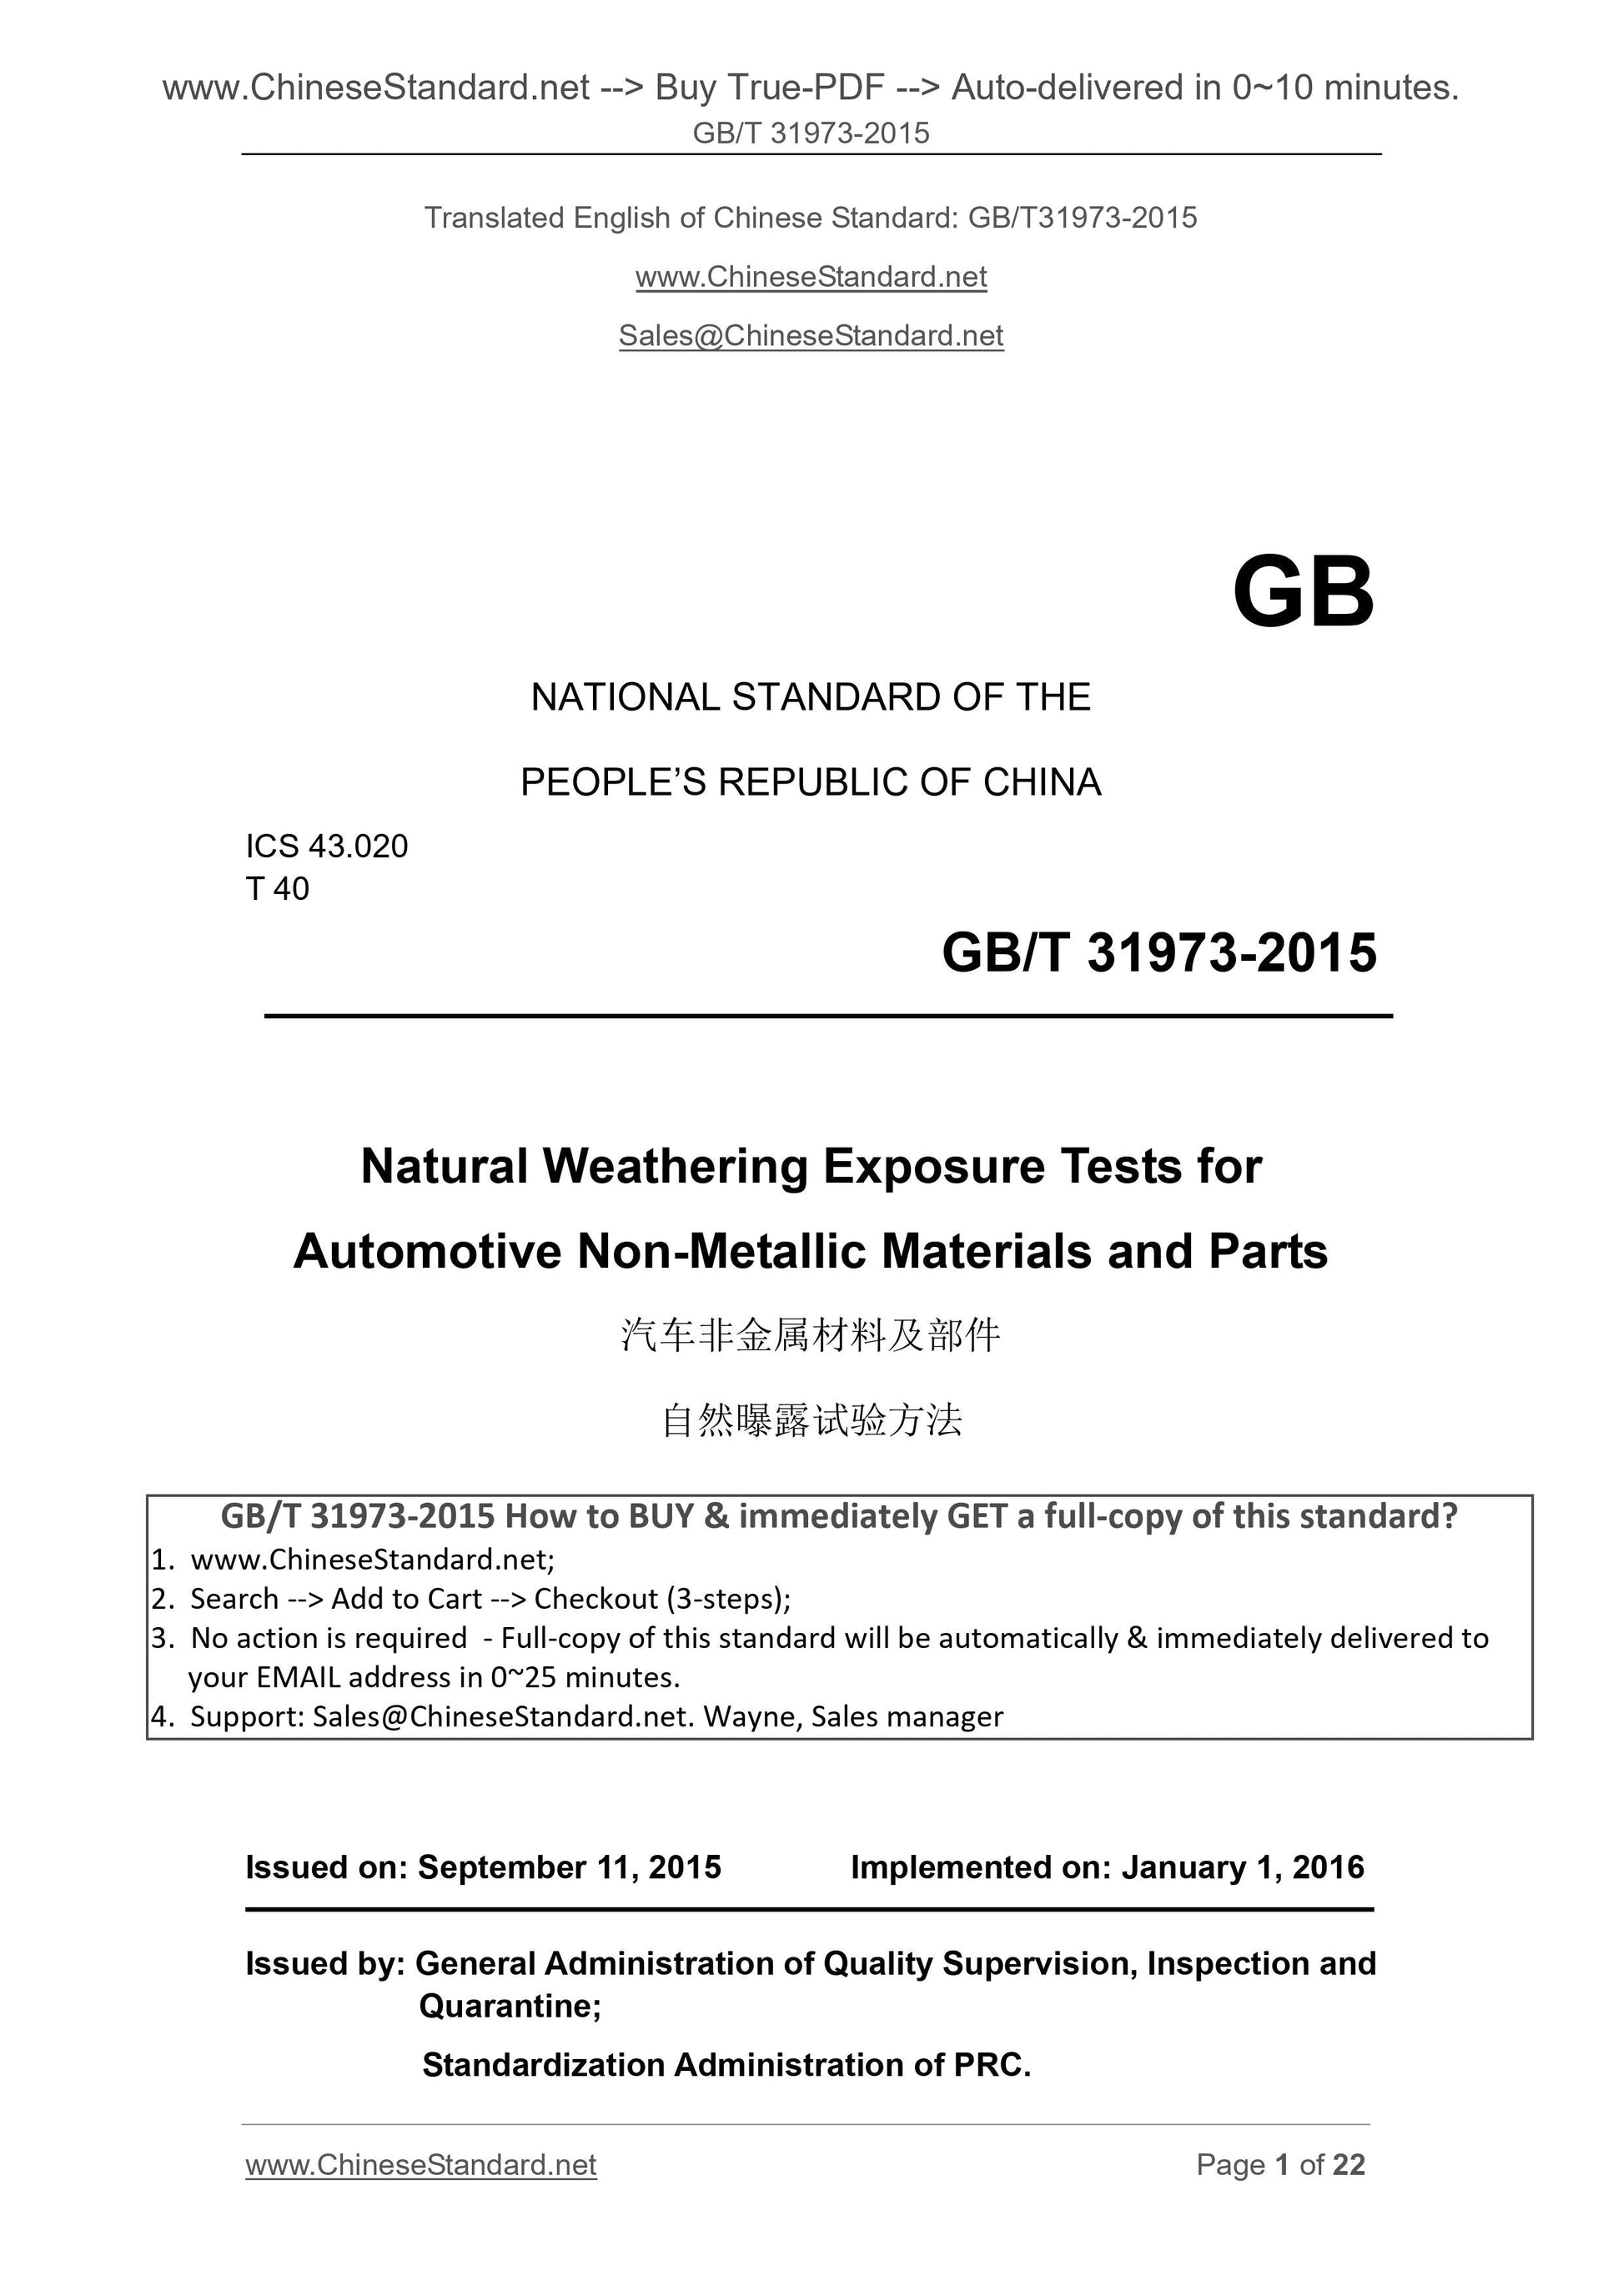 GB/T 31973-2015 Page 1